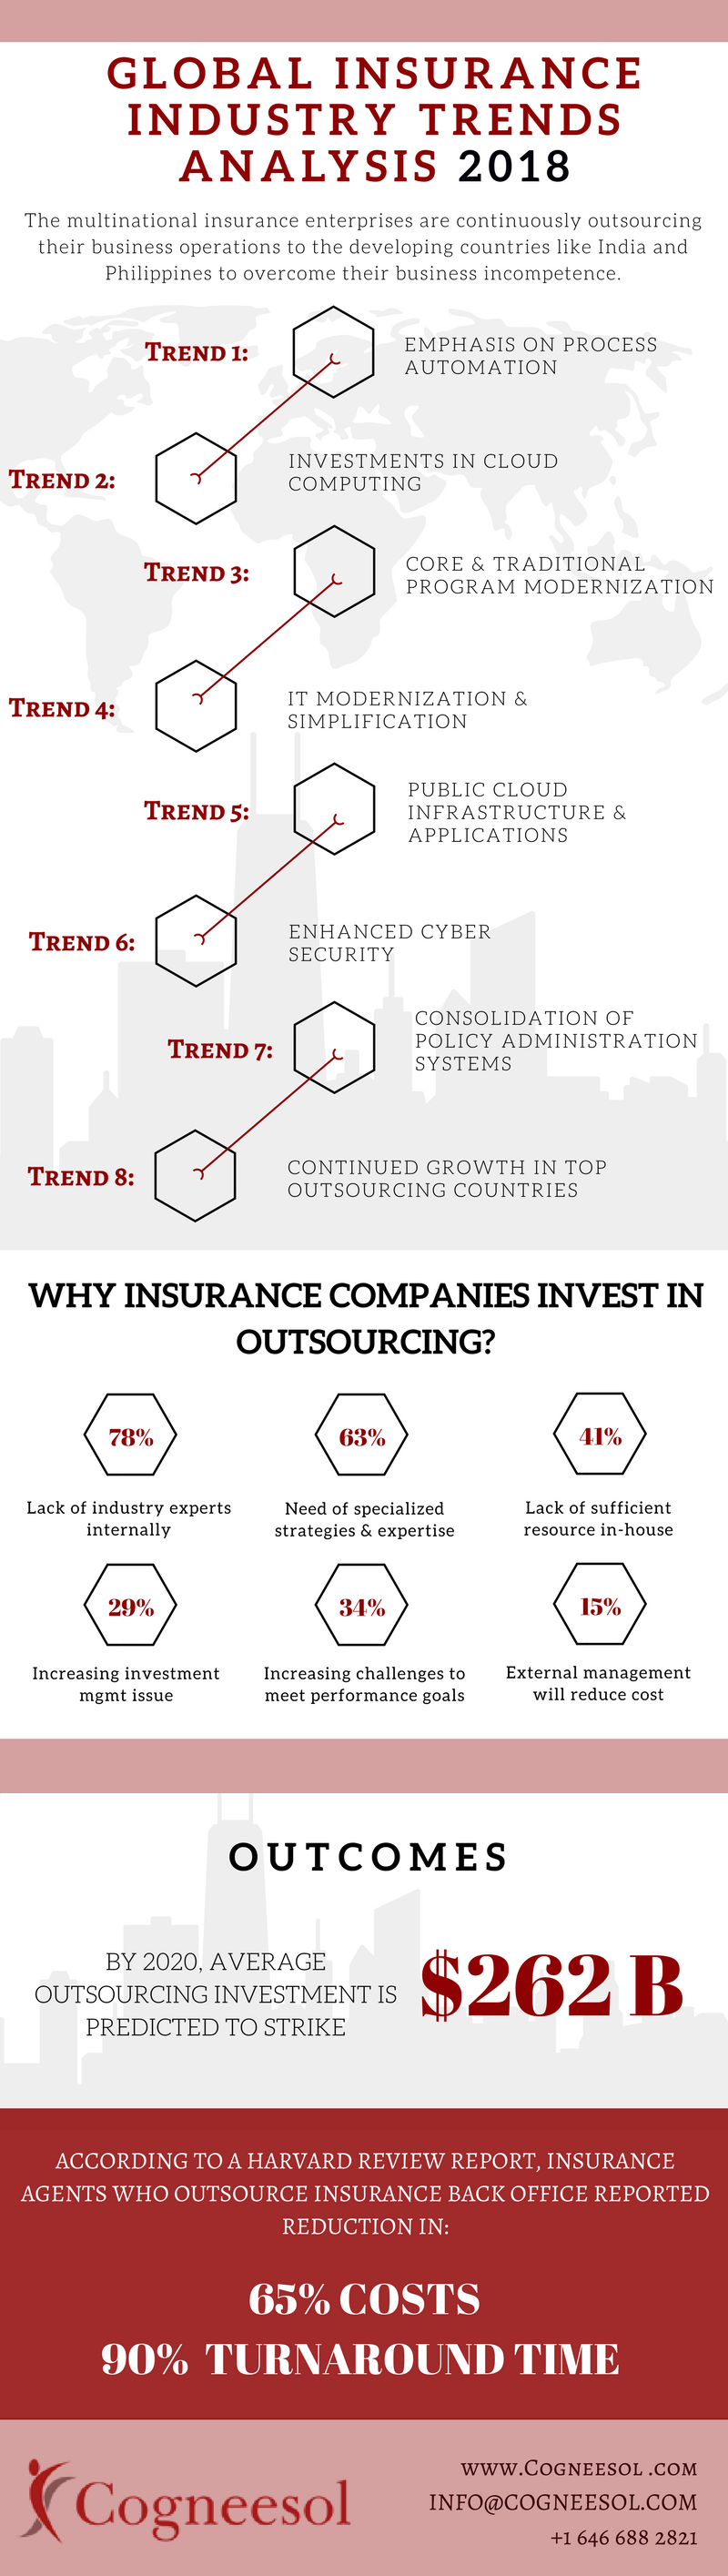 Global Insurance Industry Trends Analysis 2018